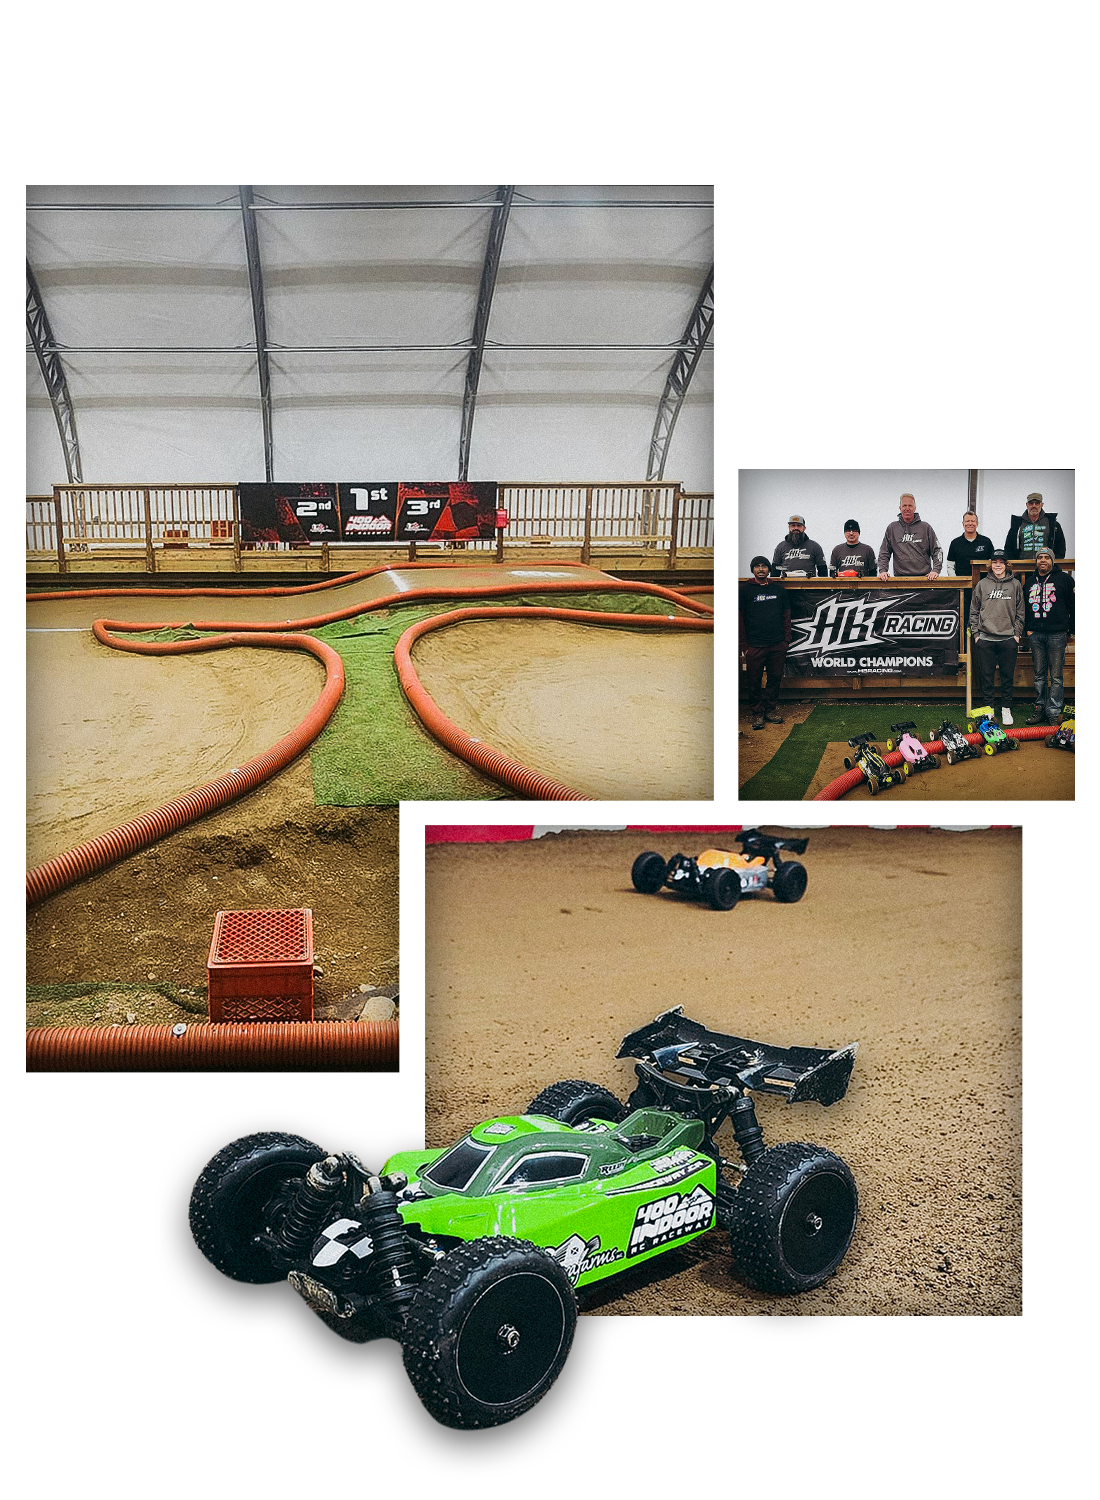 Electric RC buggy racing on a high-speed indoor track at 400 Indoor RC Raceway in Barrie.